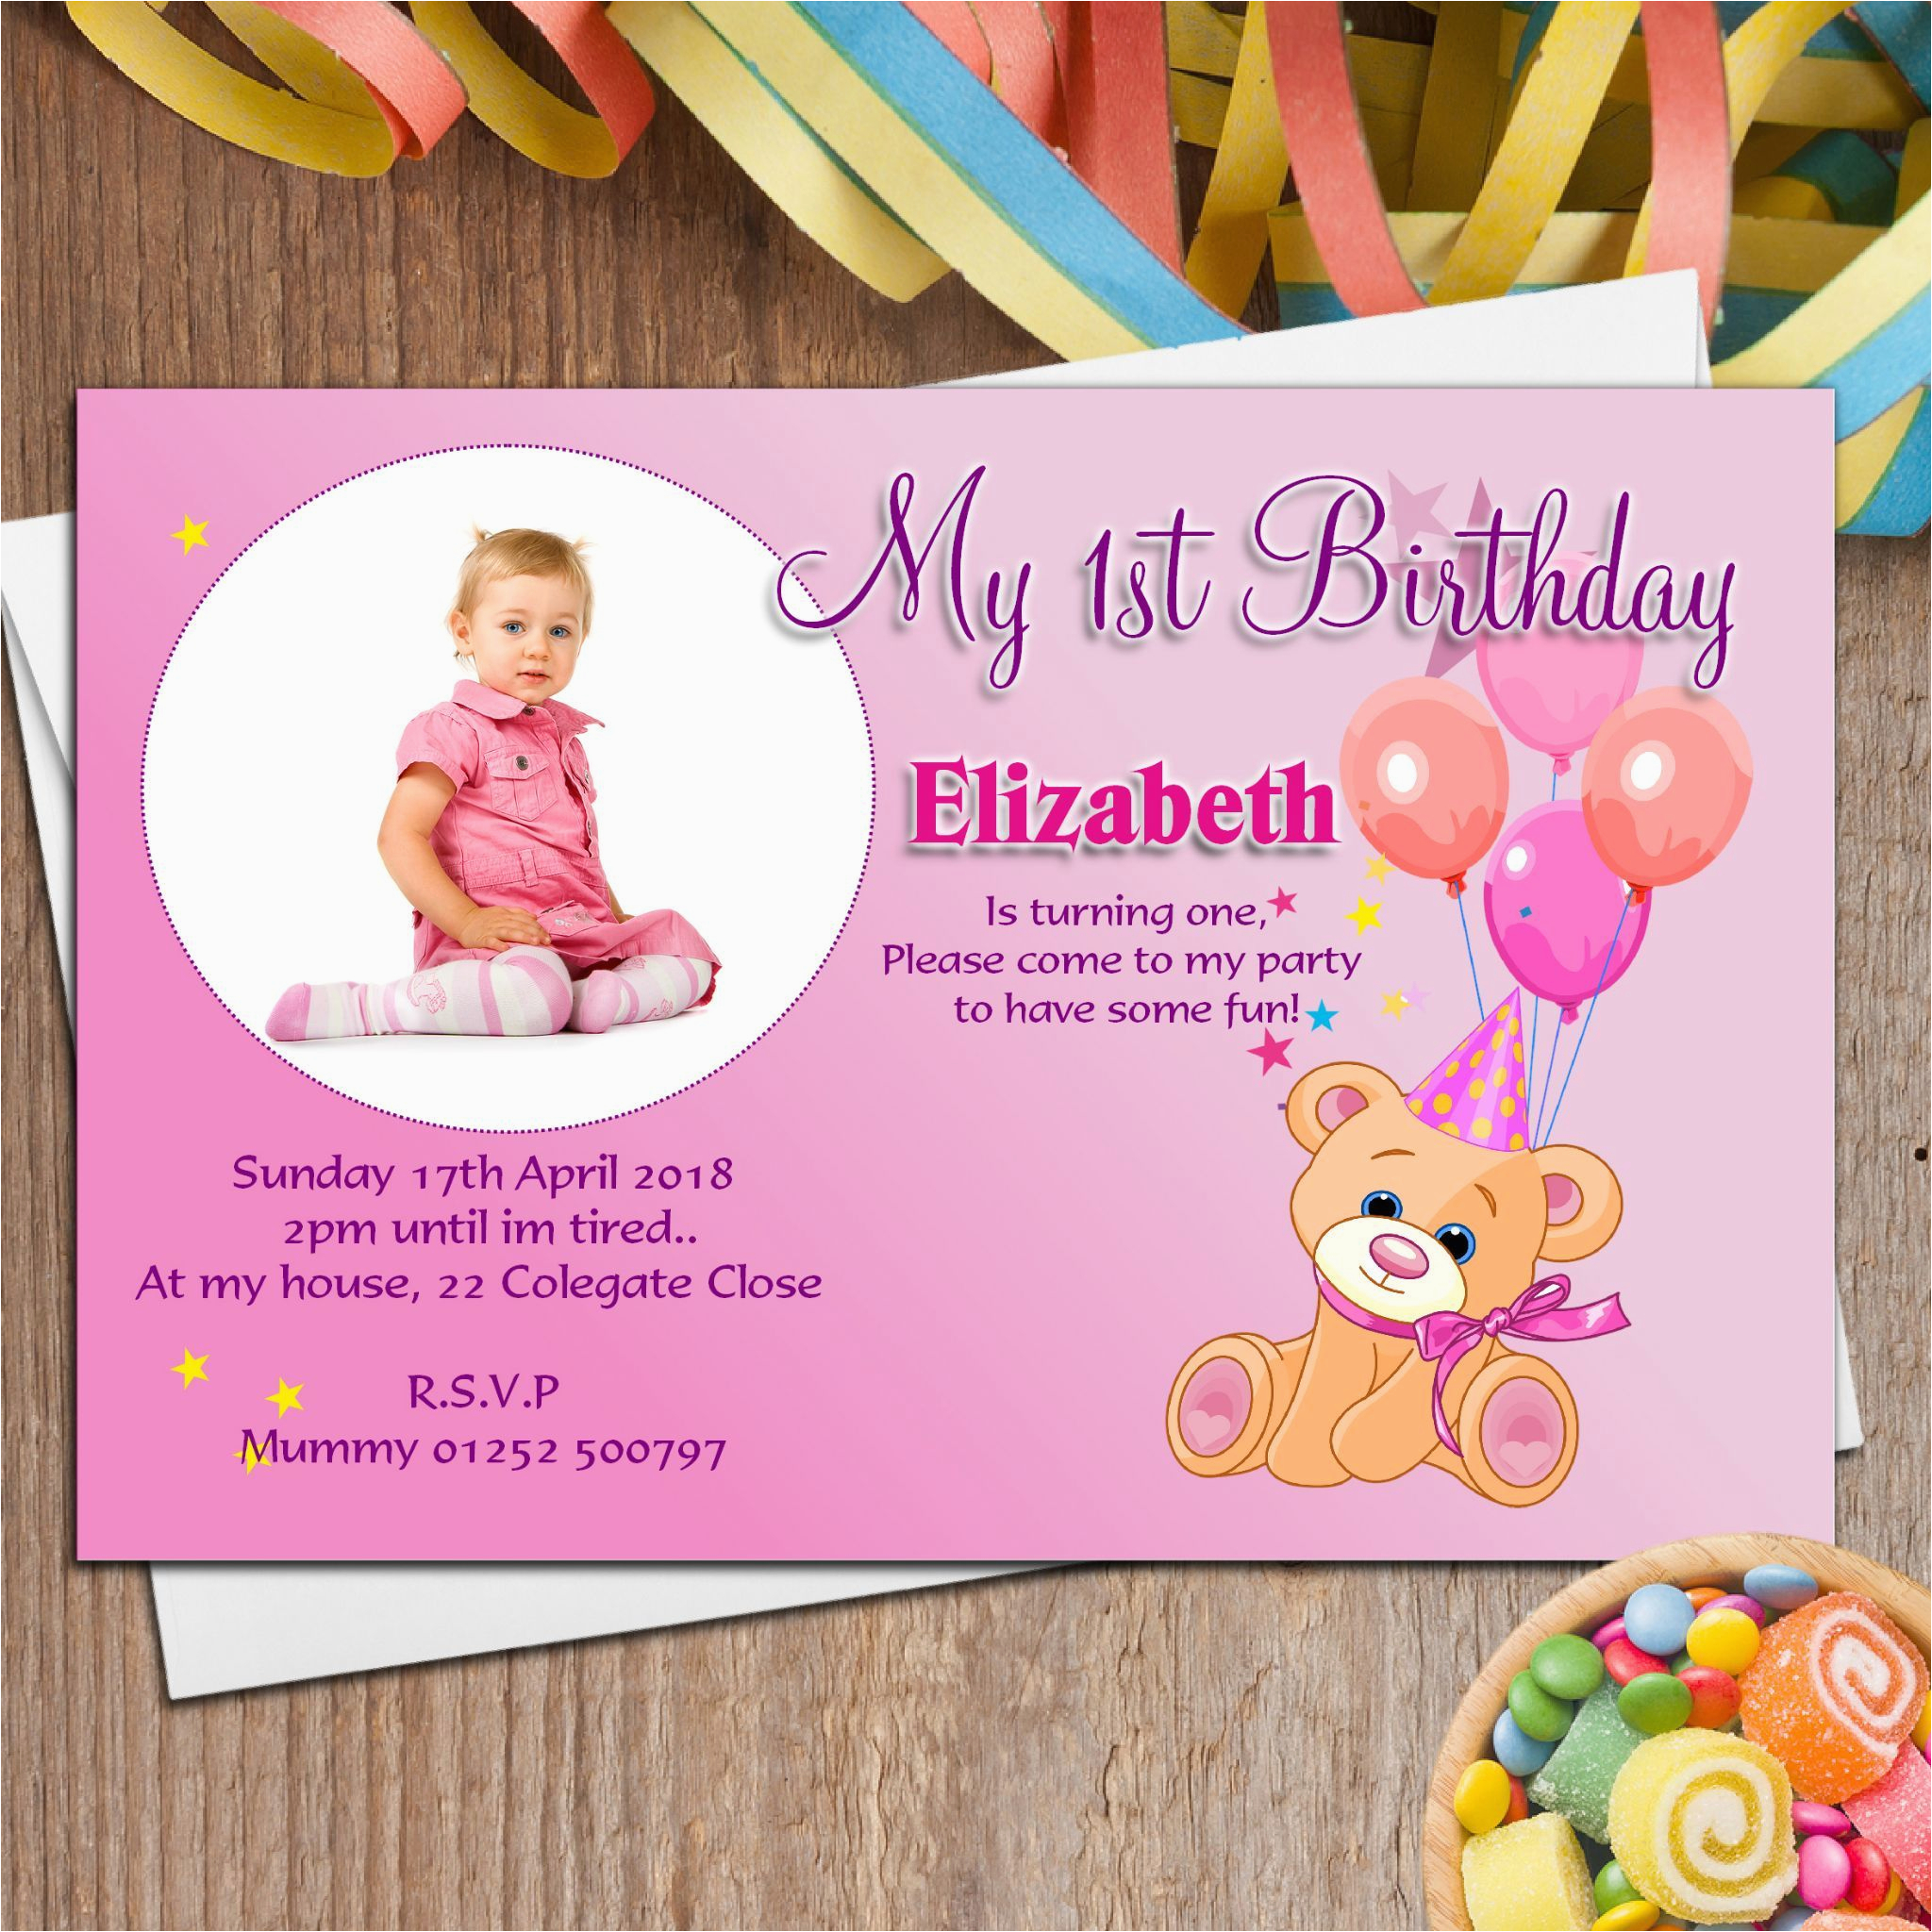 1st birthday invitation cards for baby boy in india